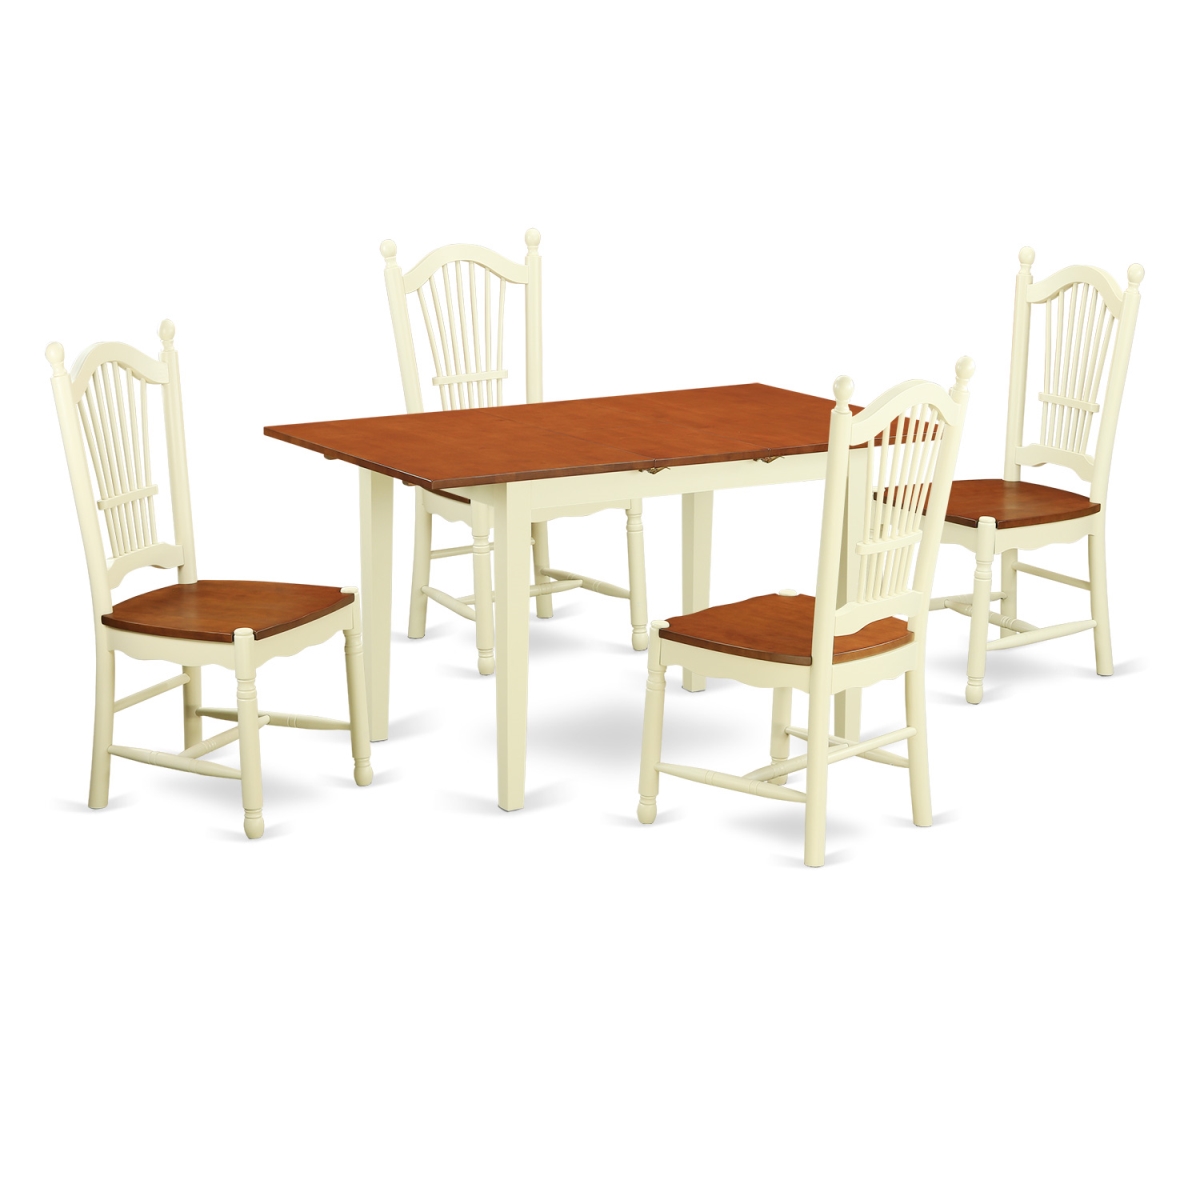 Nodo5-whi-w Wood Seat Dinette Set - Table & 4 Chairs, Buttermilk & Cherry - 5 Piece